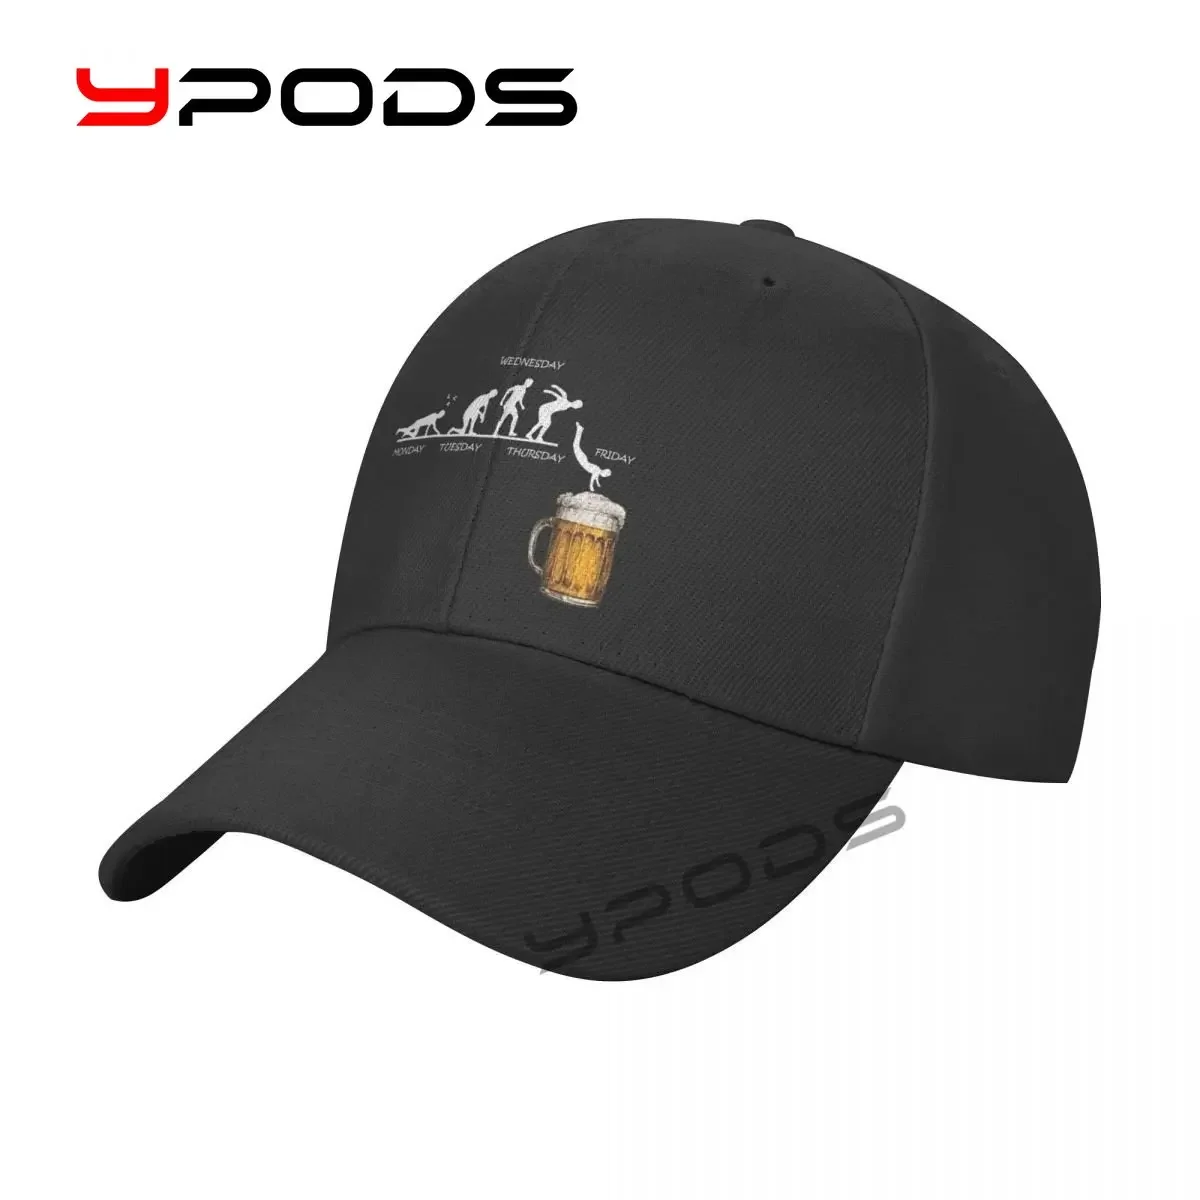 

Outdoor Sport Baseball Cap Week Craft Beer Alcohol Drunk Wine Drinking Cycle Spring And Summer Adjustable Men Women Fashion Caps